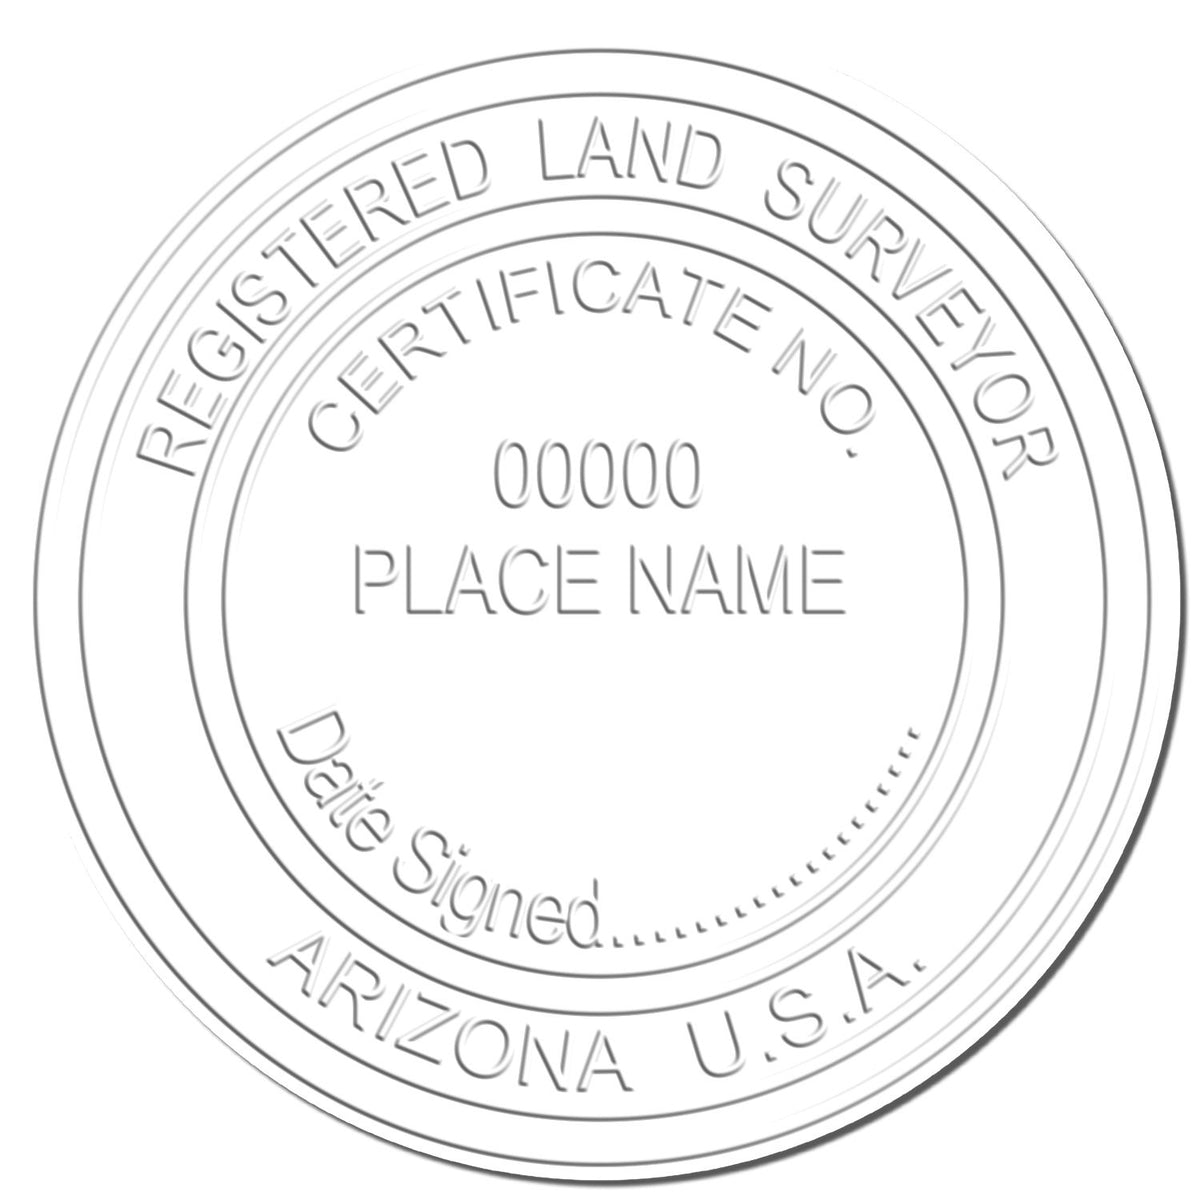 This paper is stamped with a sample imprint of the Heavy Duty Cast Iron Arizona Land Surveyor Seal Embosser, signifying its quality and reliability.